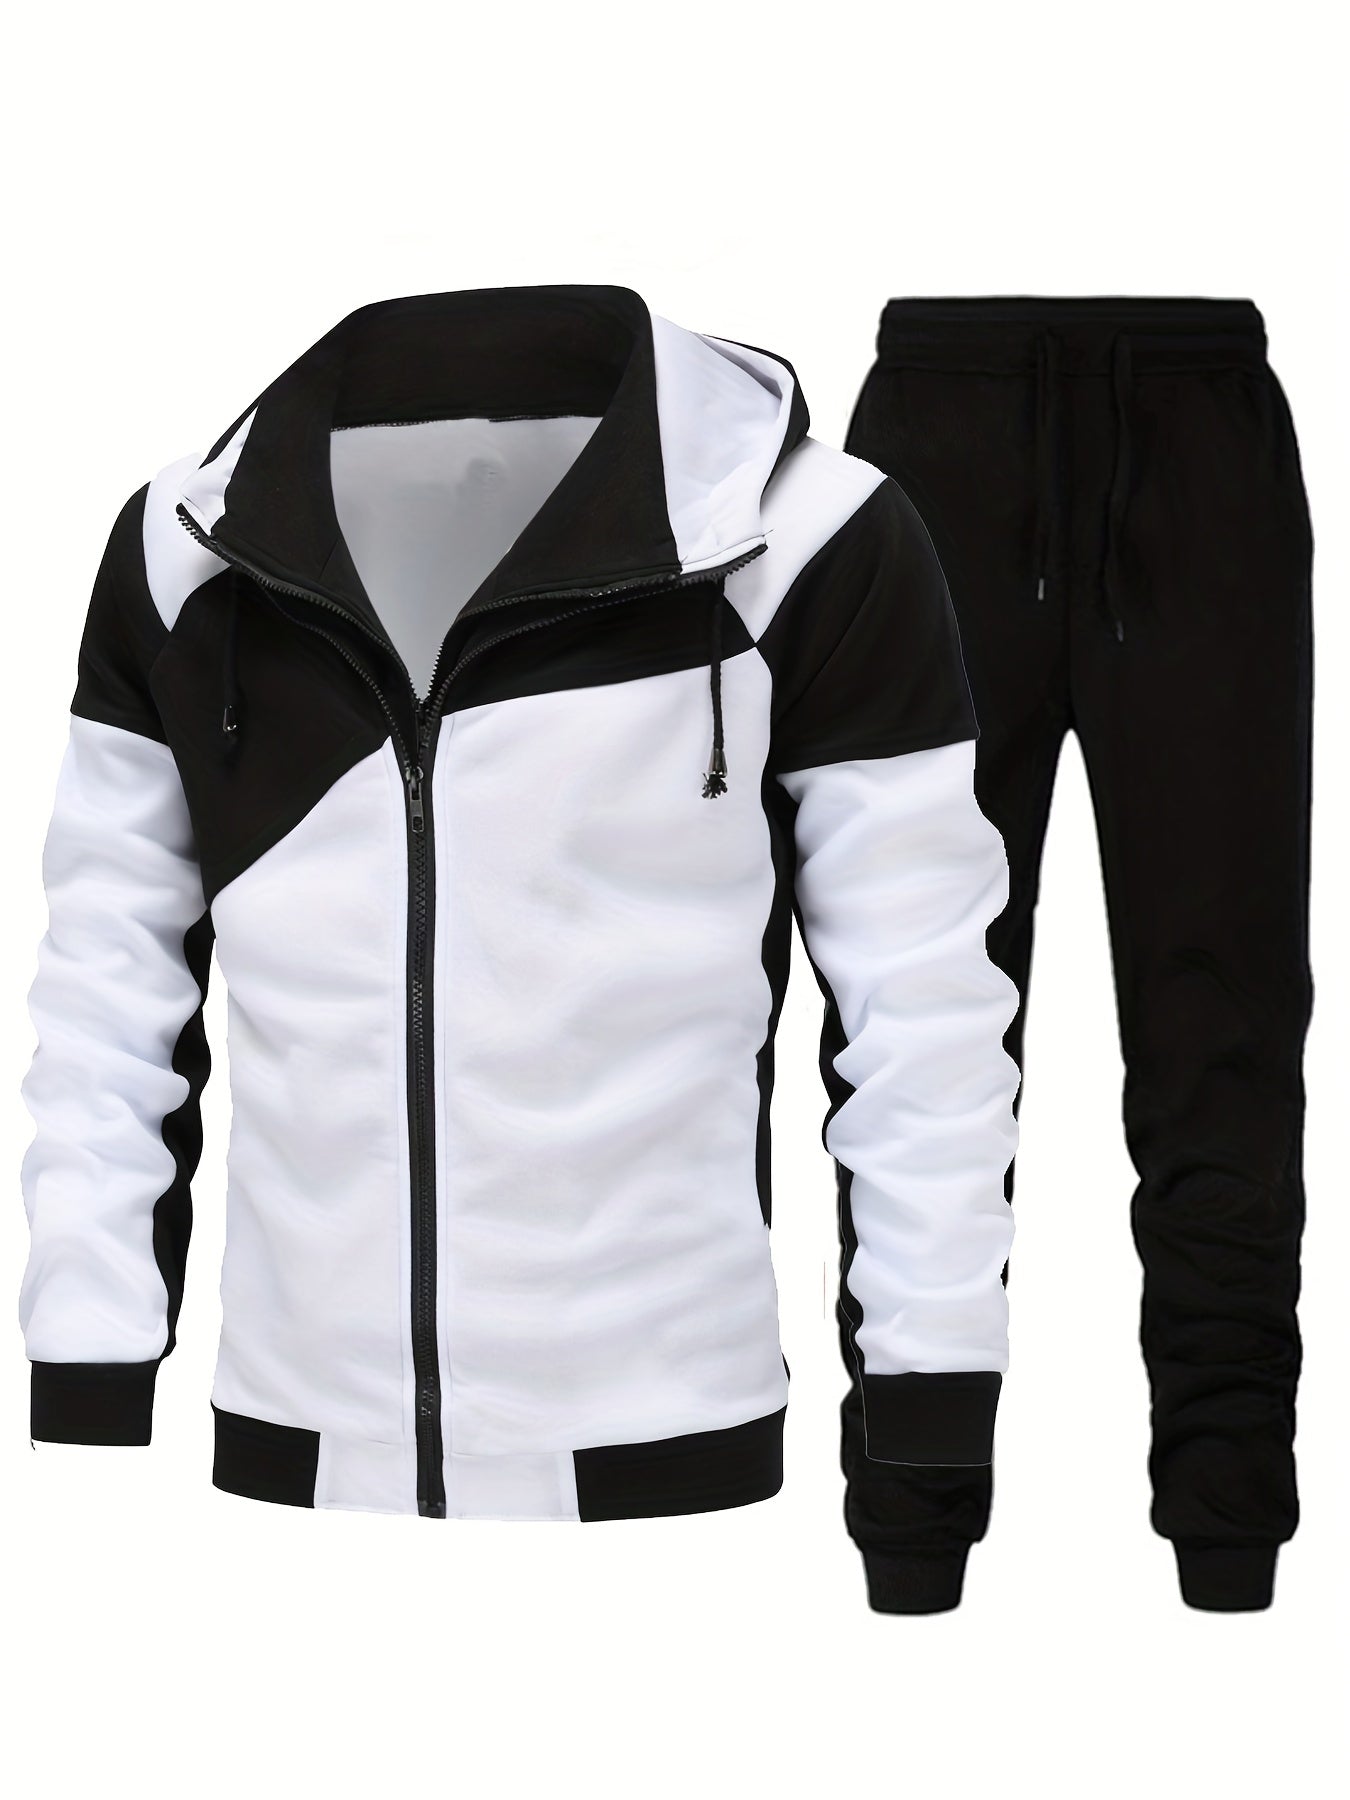 Classic Color Block Men's Athletic 2Pcs Tracksuit Set Casual Full-Zip Sweatsuits Long Sleeve Jacket And Jogging Pants Set For Gym Workout Running